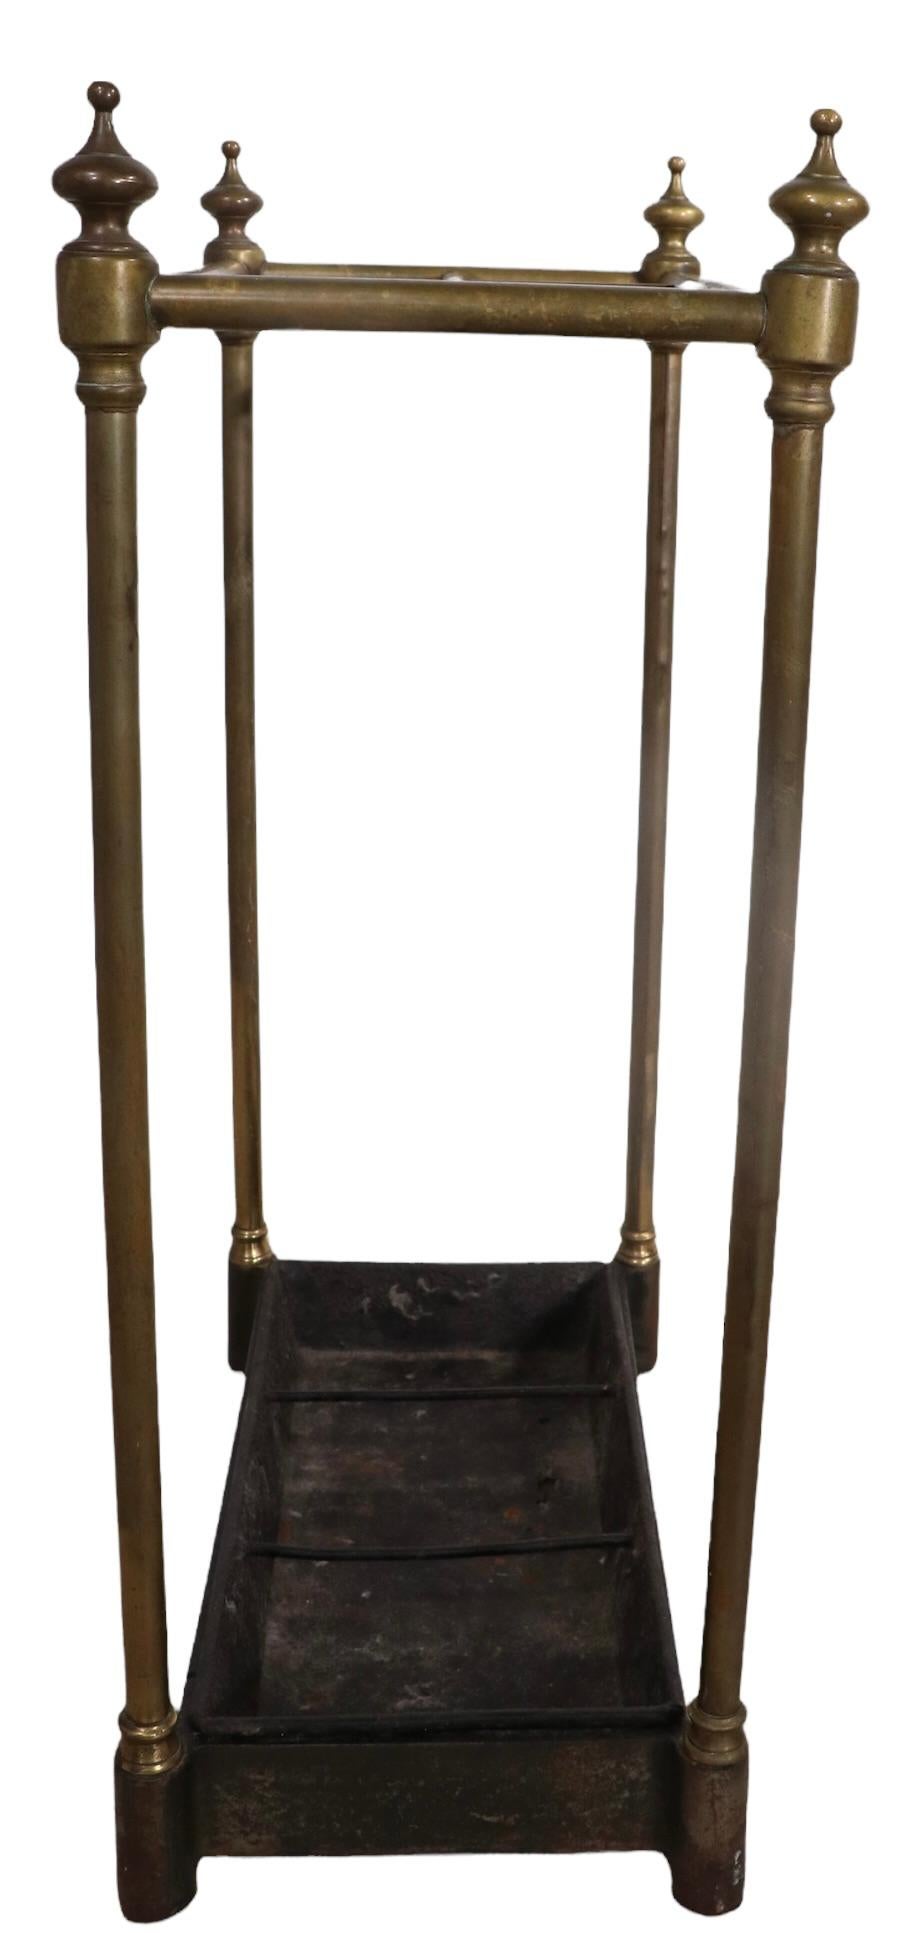 Architectural Brass and Iron Cane Umbrella Stand In Good Condition For Sale In New York, NY